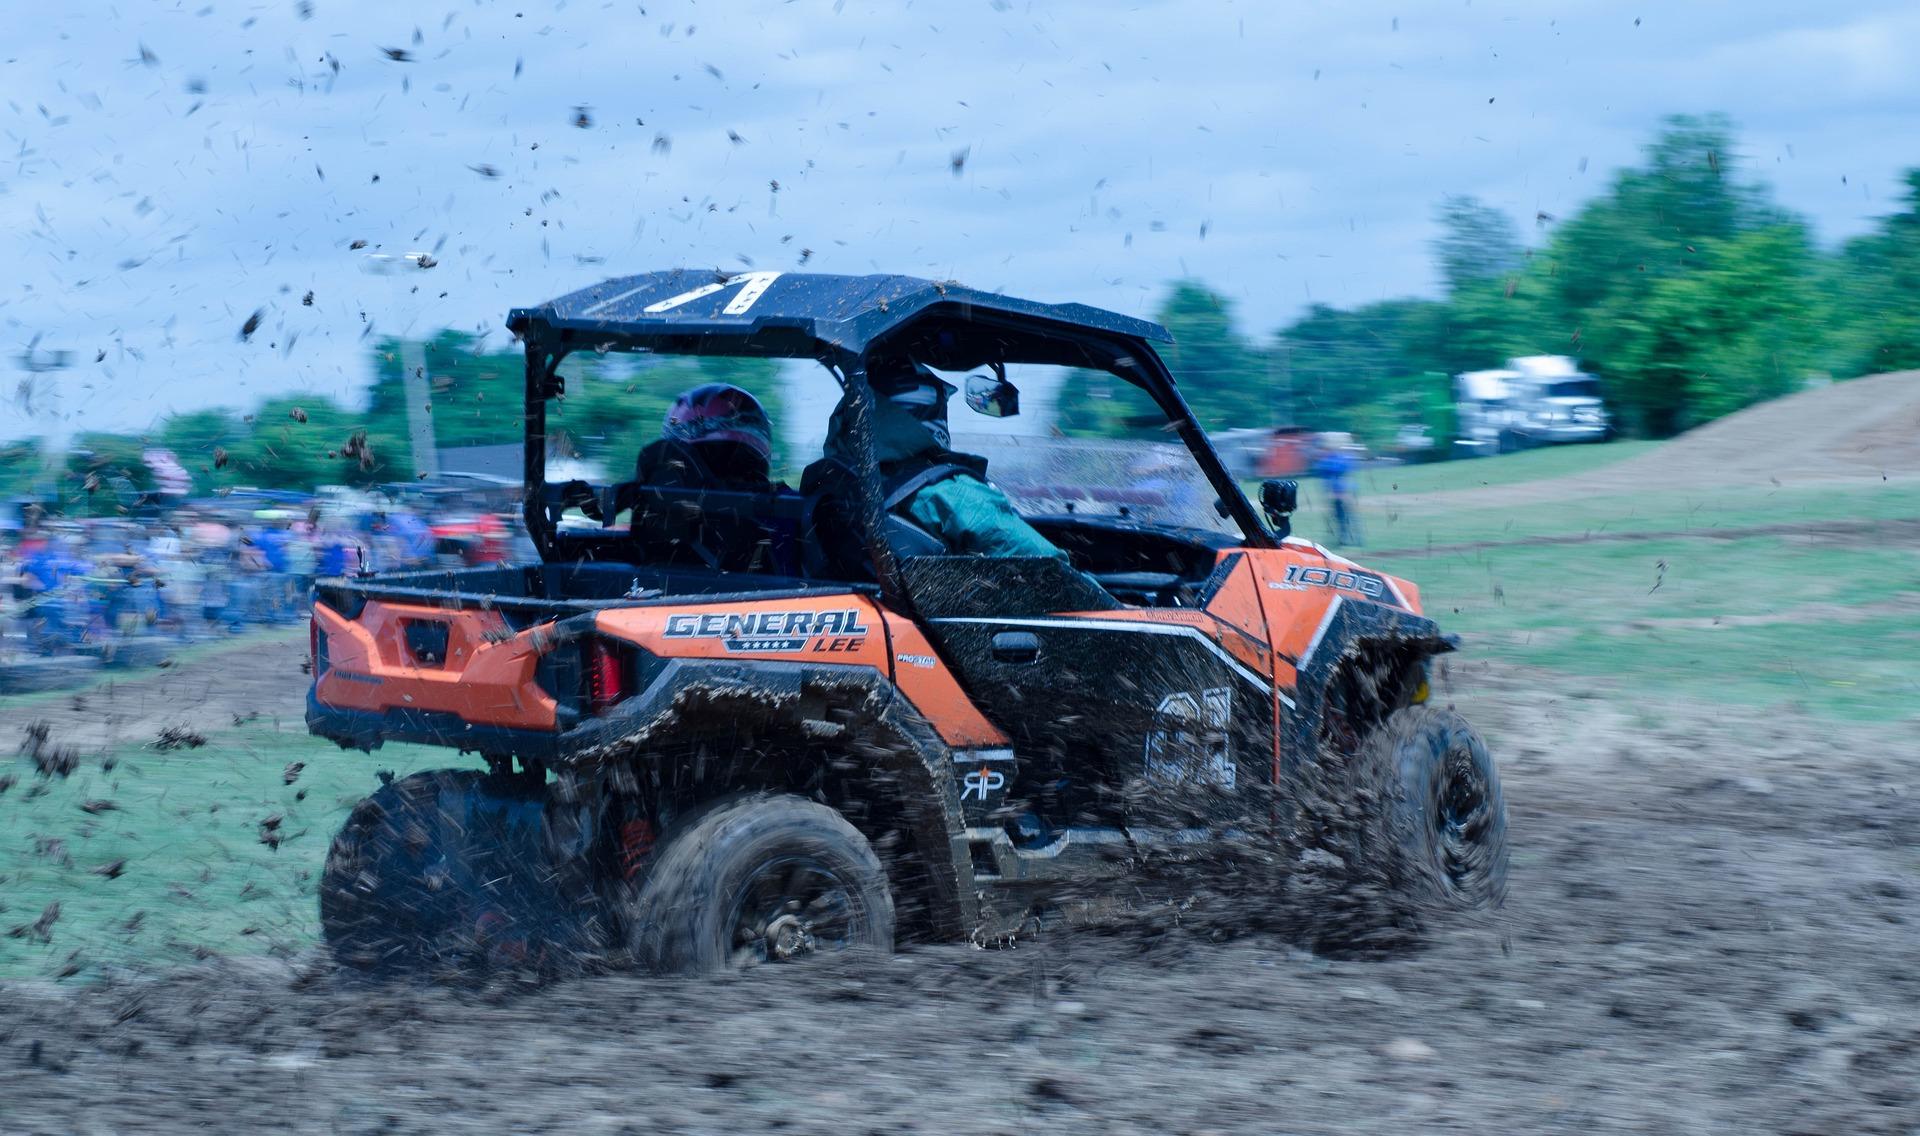 Image of an atv driving in mud